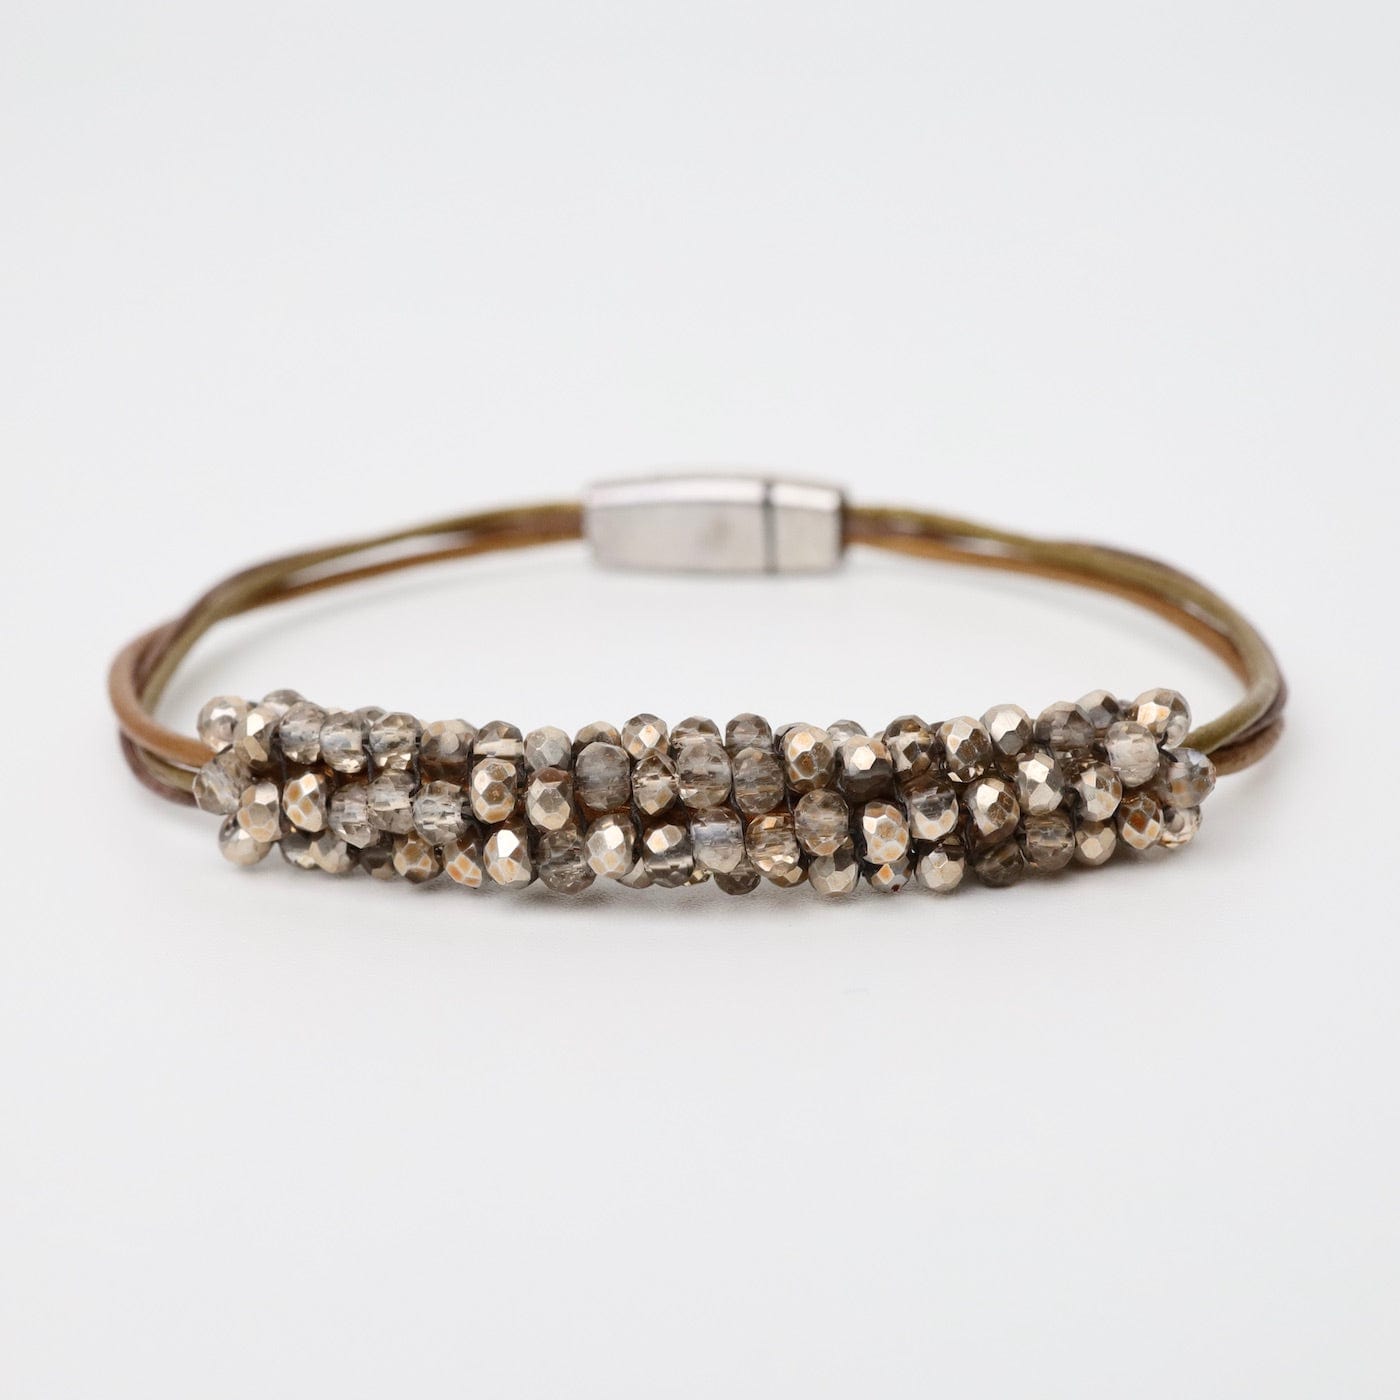 BRC-JM Hand Stitched Mixed Gold Crystals Leather Bracelet